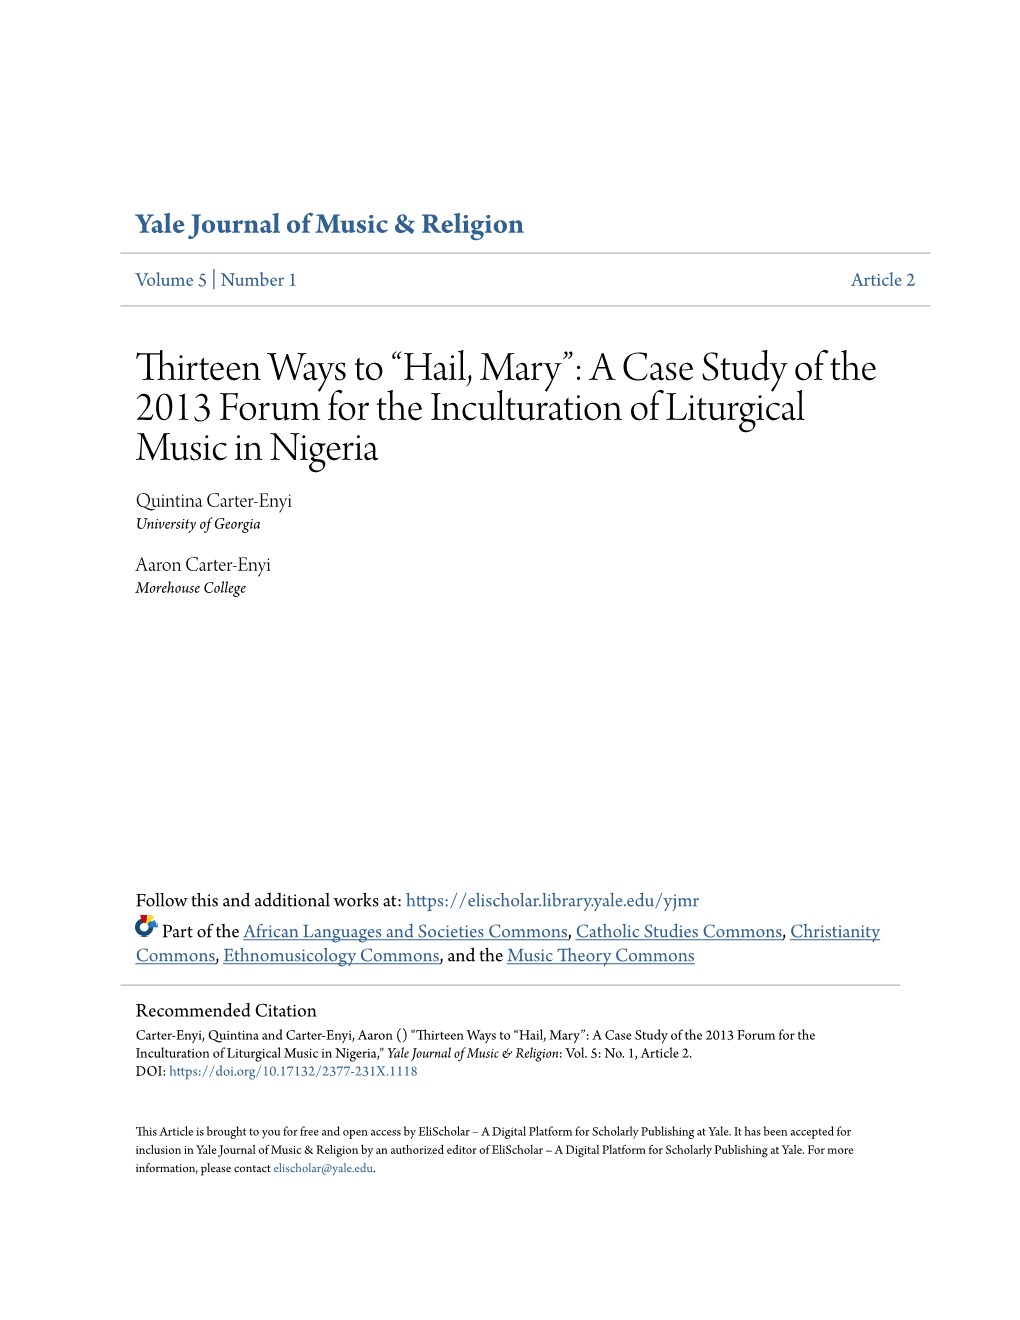 “Hail, Mary”: a Case Study of the 2013 Forum for the Inculturation of Liturgical Music in Nigeria Quintina Carter-Enyi University of Georgia